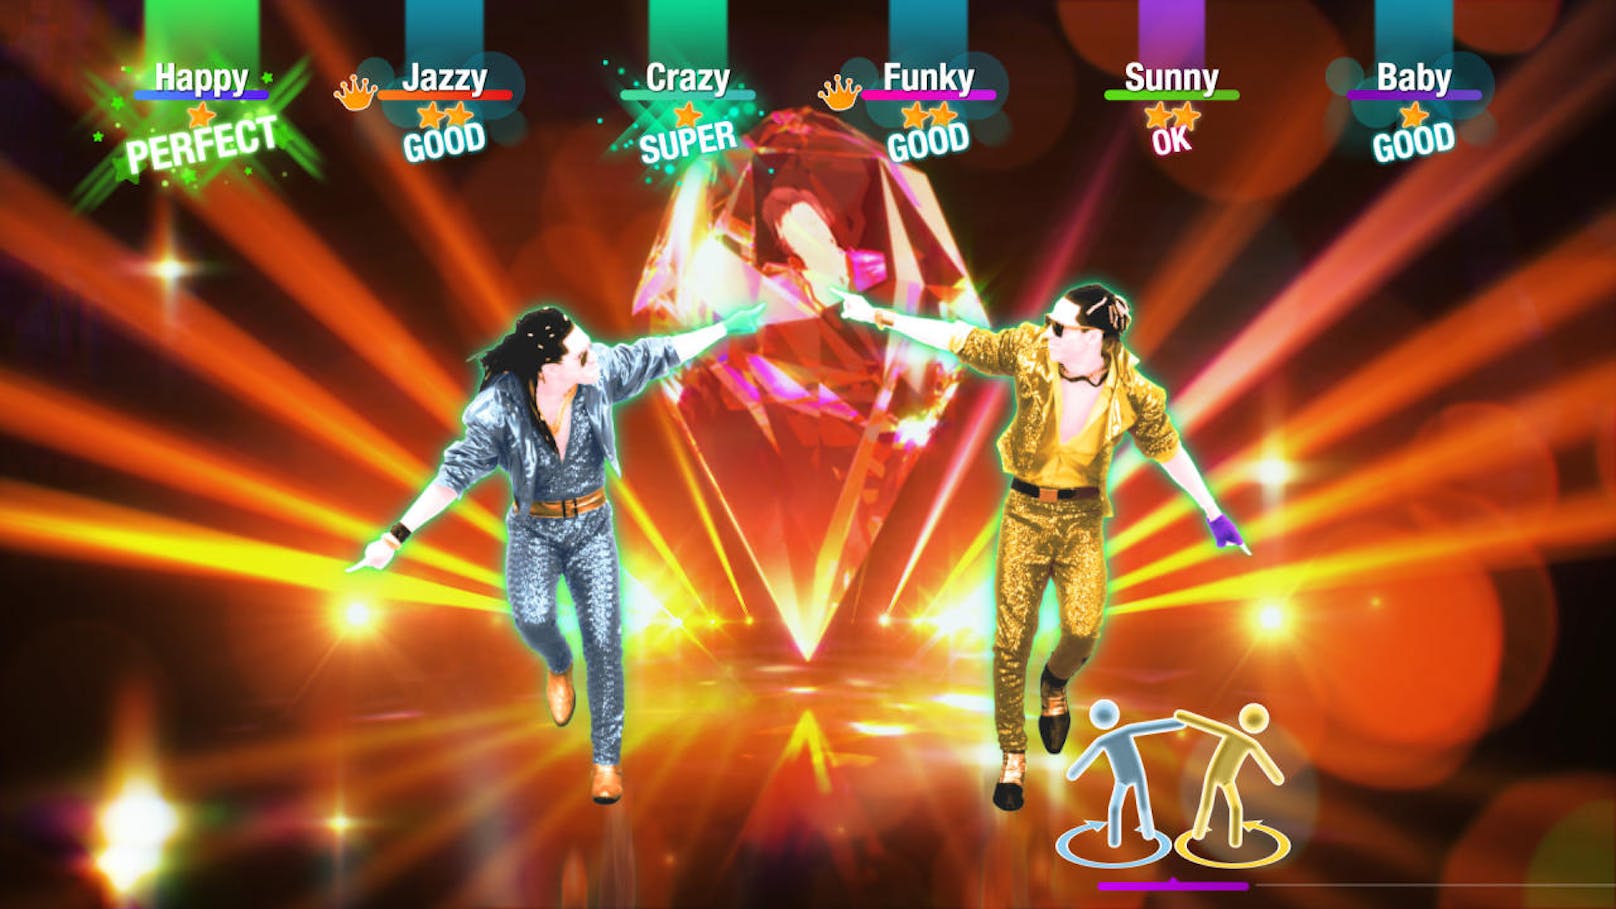  <a href="https://www.heute.at/s/-just-dance-2020-im-test-panic-at-the-disco-40698496" target="_blank">Just Dance 2020</a>